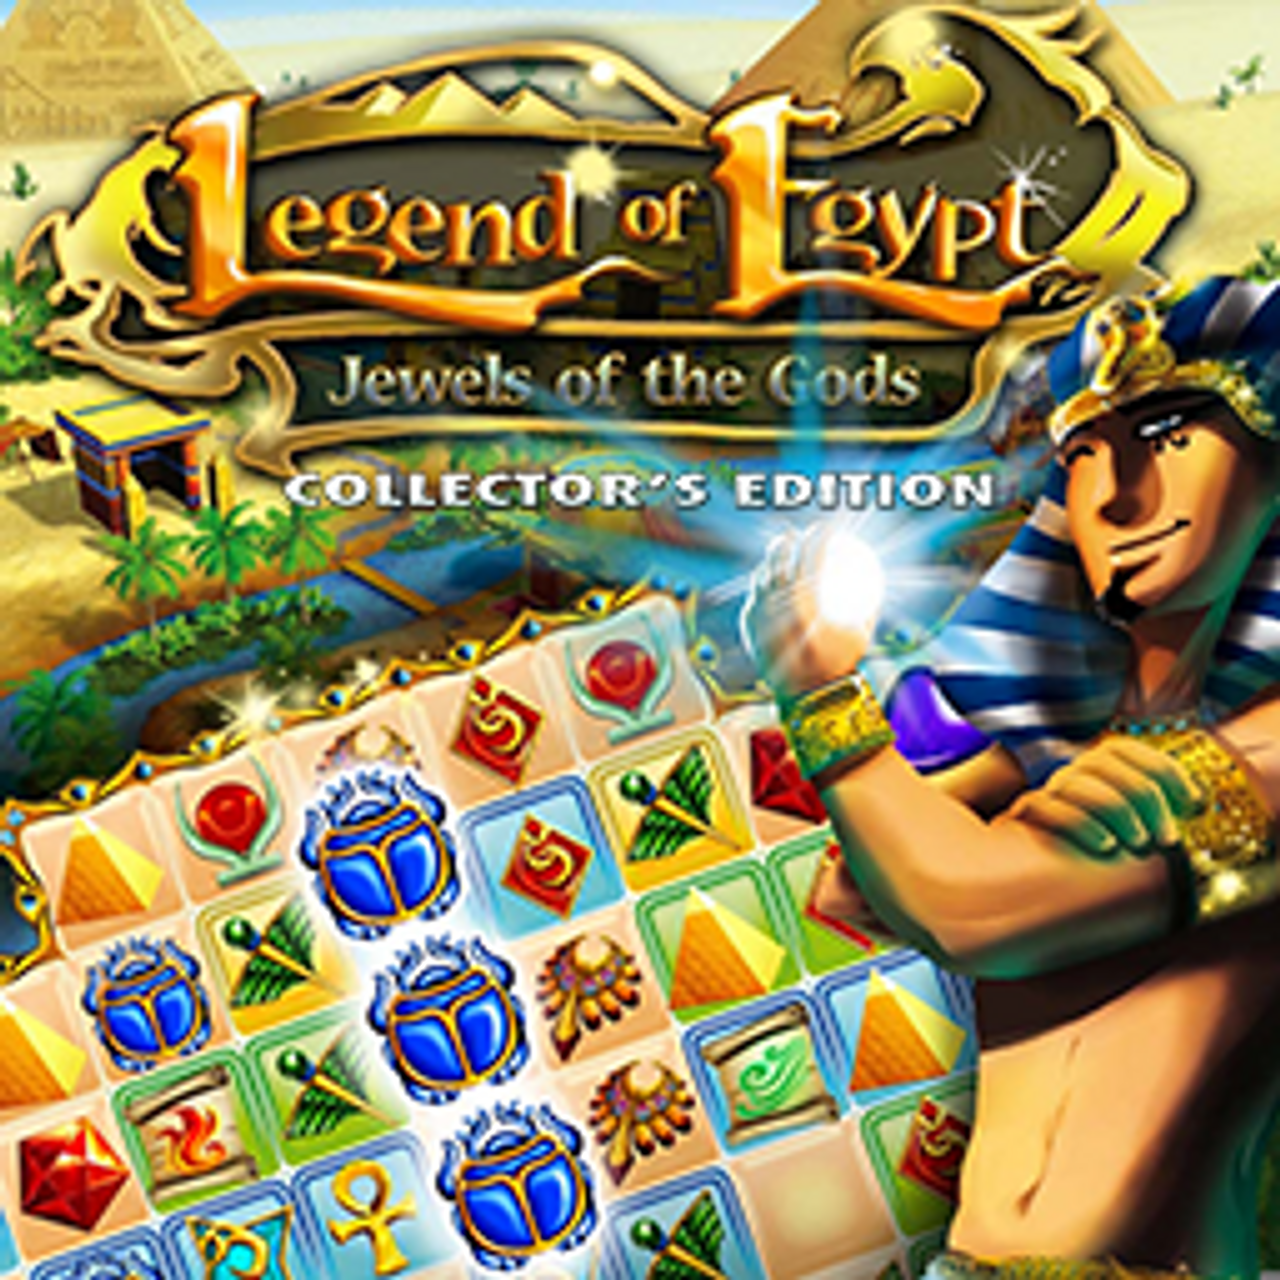 Legend of Egypt: Jewels of the Gods Collectors Edition